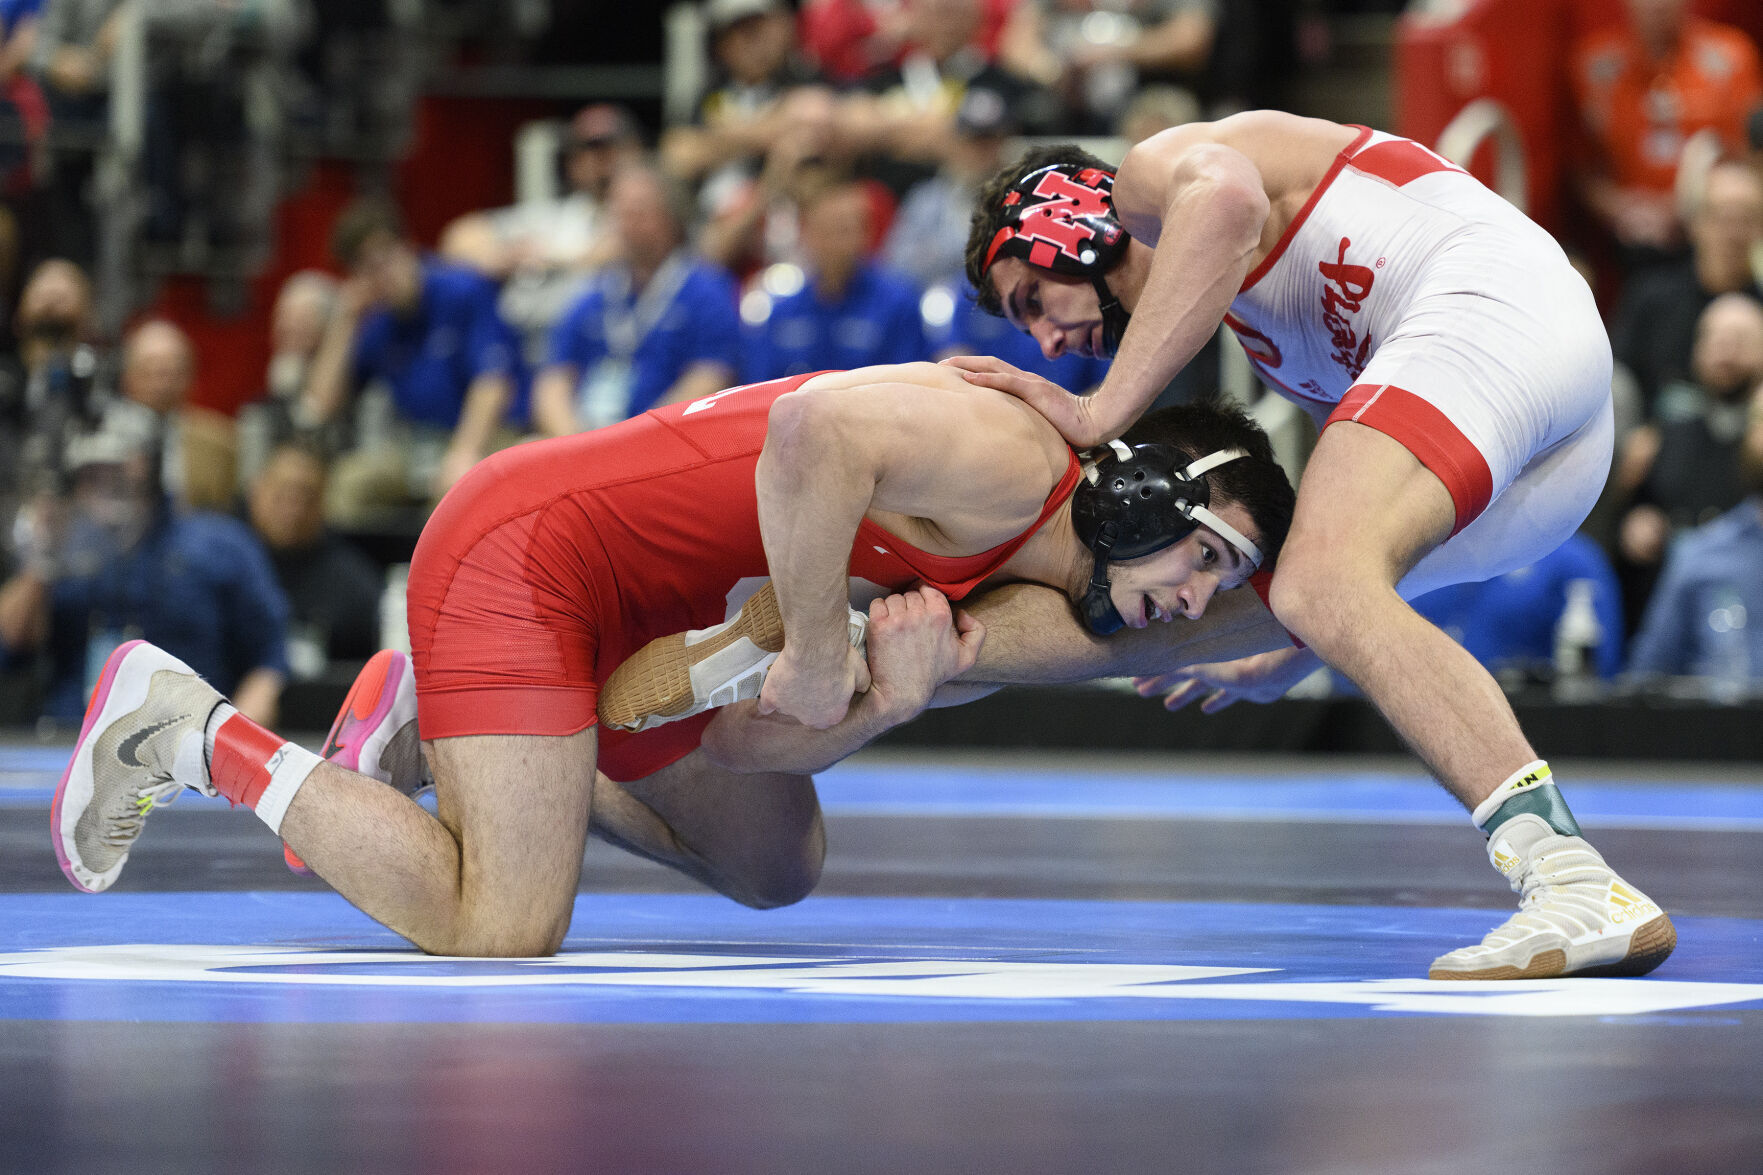 Lovett falls short in final at NCAA wrestling championships; Huskers notch best finish since 2009 pic